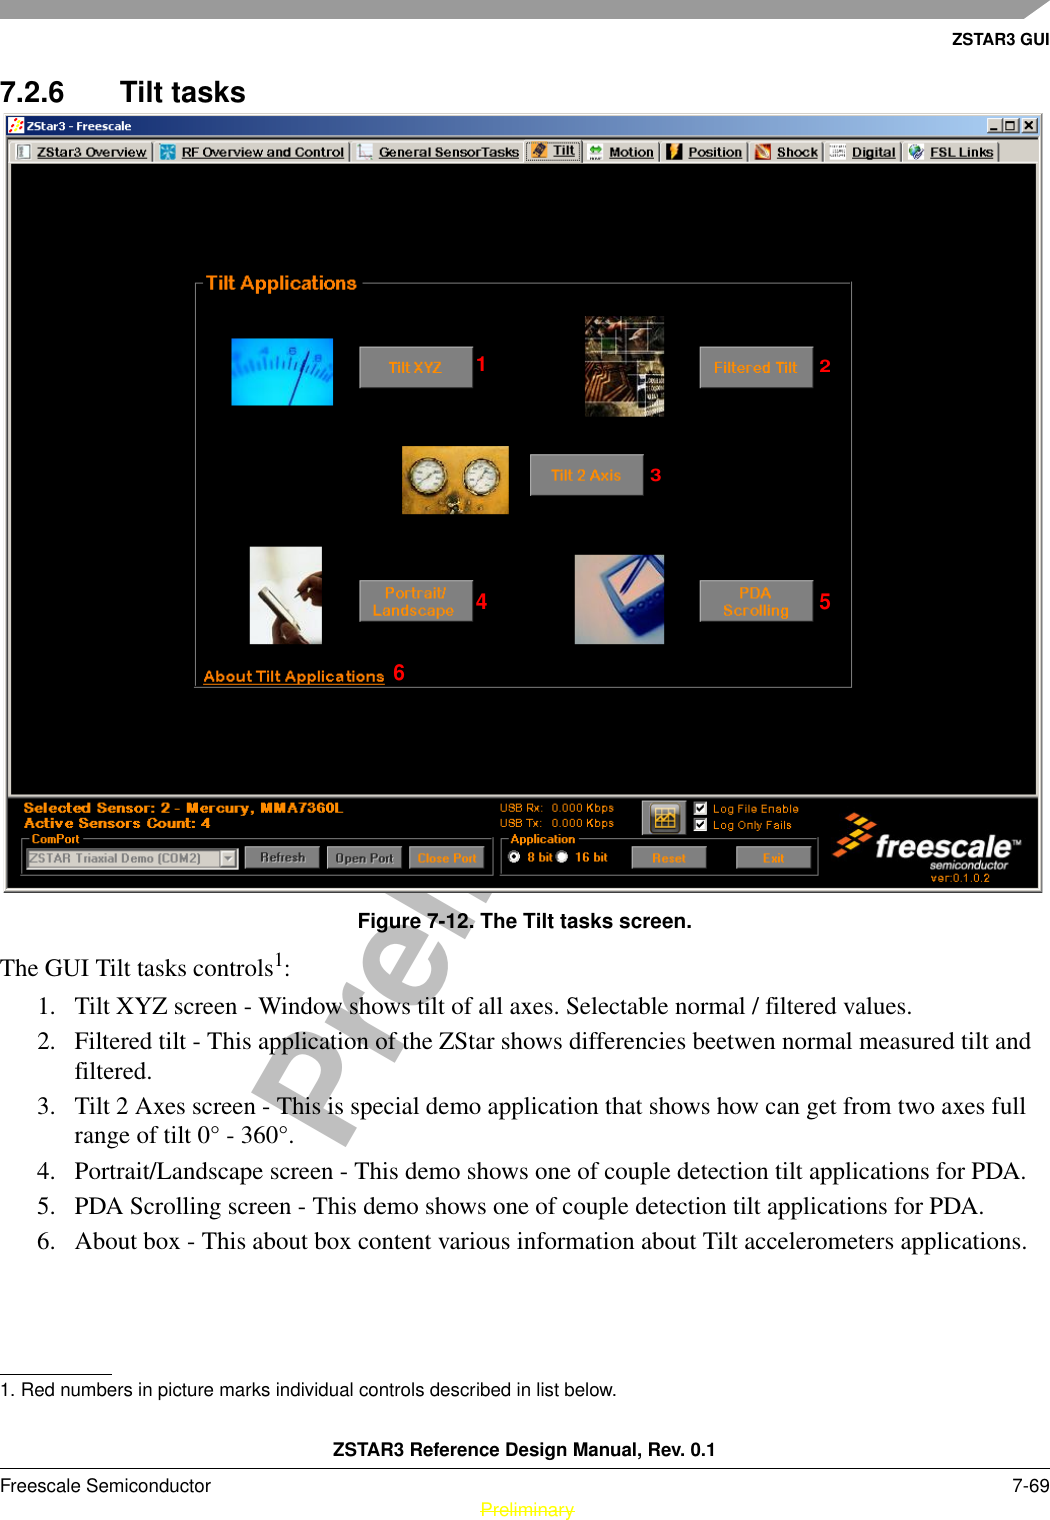 ZSTAR3 GUIZSTAR3 Reference Design Manual, Rev. 0.1Freescale Semiconductor 7-69 PreliminaryPreliminary7.2.6 Tilt tasksFigure 7-12. The Tilt tasks screen.The GUI Tilt tasks controls1: 1. Tilt XYZ screen - Window shows tilt of all axes. Selectable normal / filtered values.2. Filtered tilt - This application of the ZStar shows differencies beetwen normal measured tilt and filtered.3. Tilt 2 Axes screen - This is special demo application that shows how can get from two axes full range of tilt 0° - 360°.4. Portrait/Landscape screen - This demo shows one of couple detection tilt applications for PDA.5. PDA Scrolling screen - This demo shows one of couple detection tilt applications for PDA.6. About box - This about box content various information about Tilt accelerometers applications.1. Red numbers in picture marks individual controls described in list below.123456